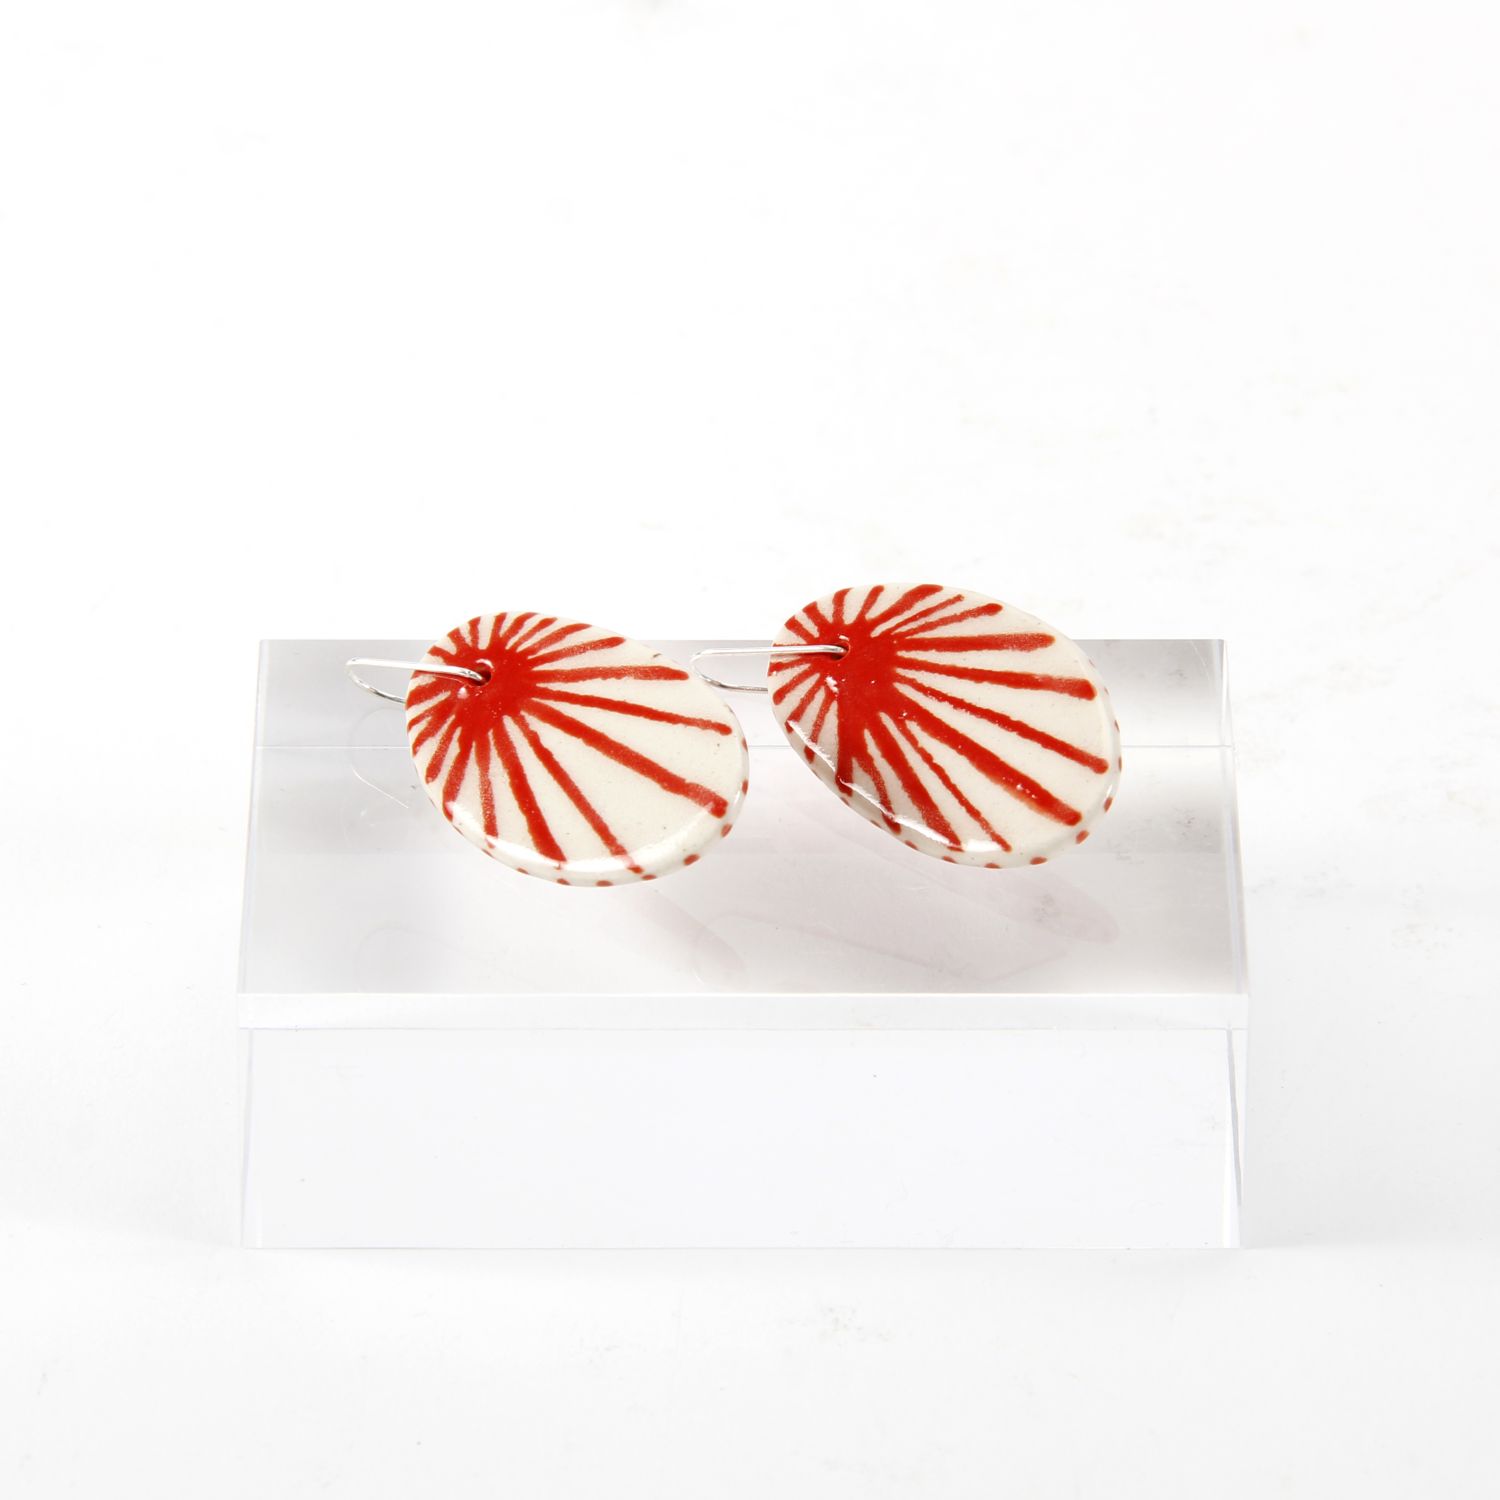 Here and Here: Medium Disc Earrings with Radiating Lines Product Image 2 of 2